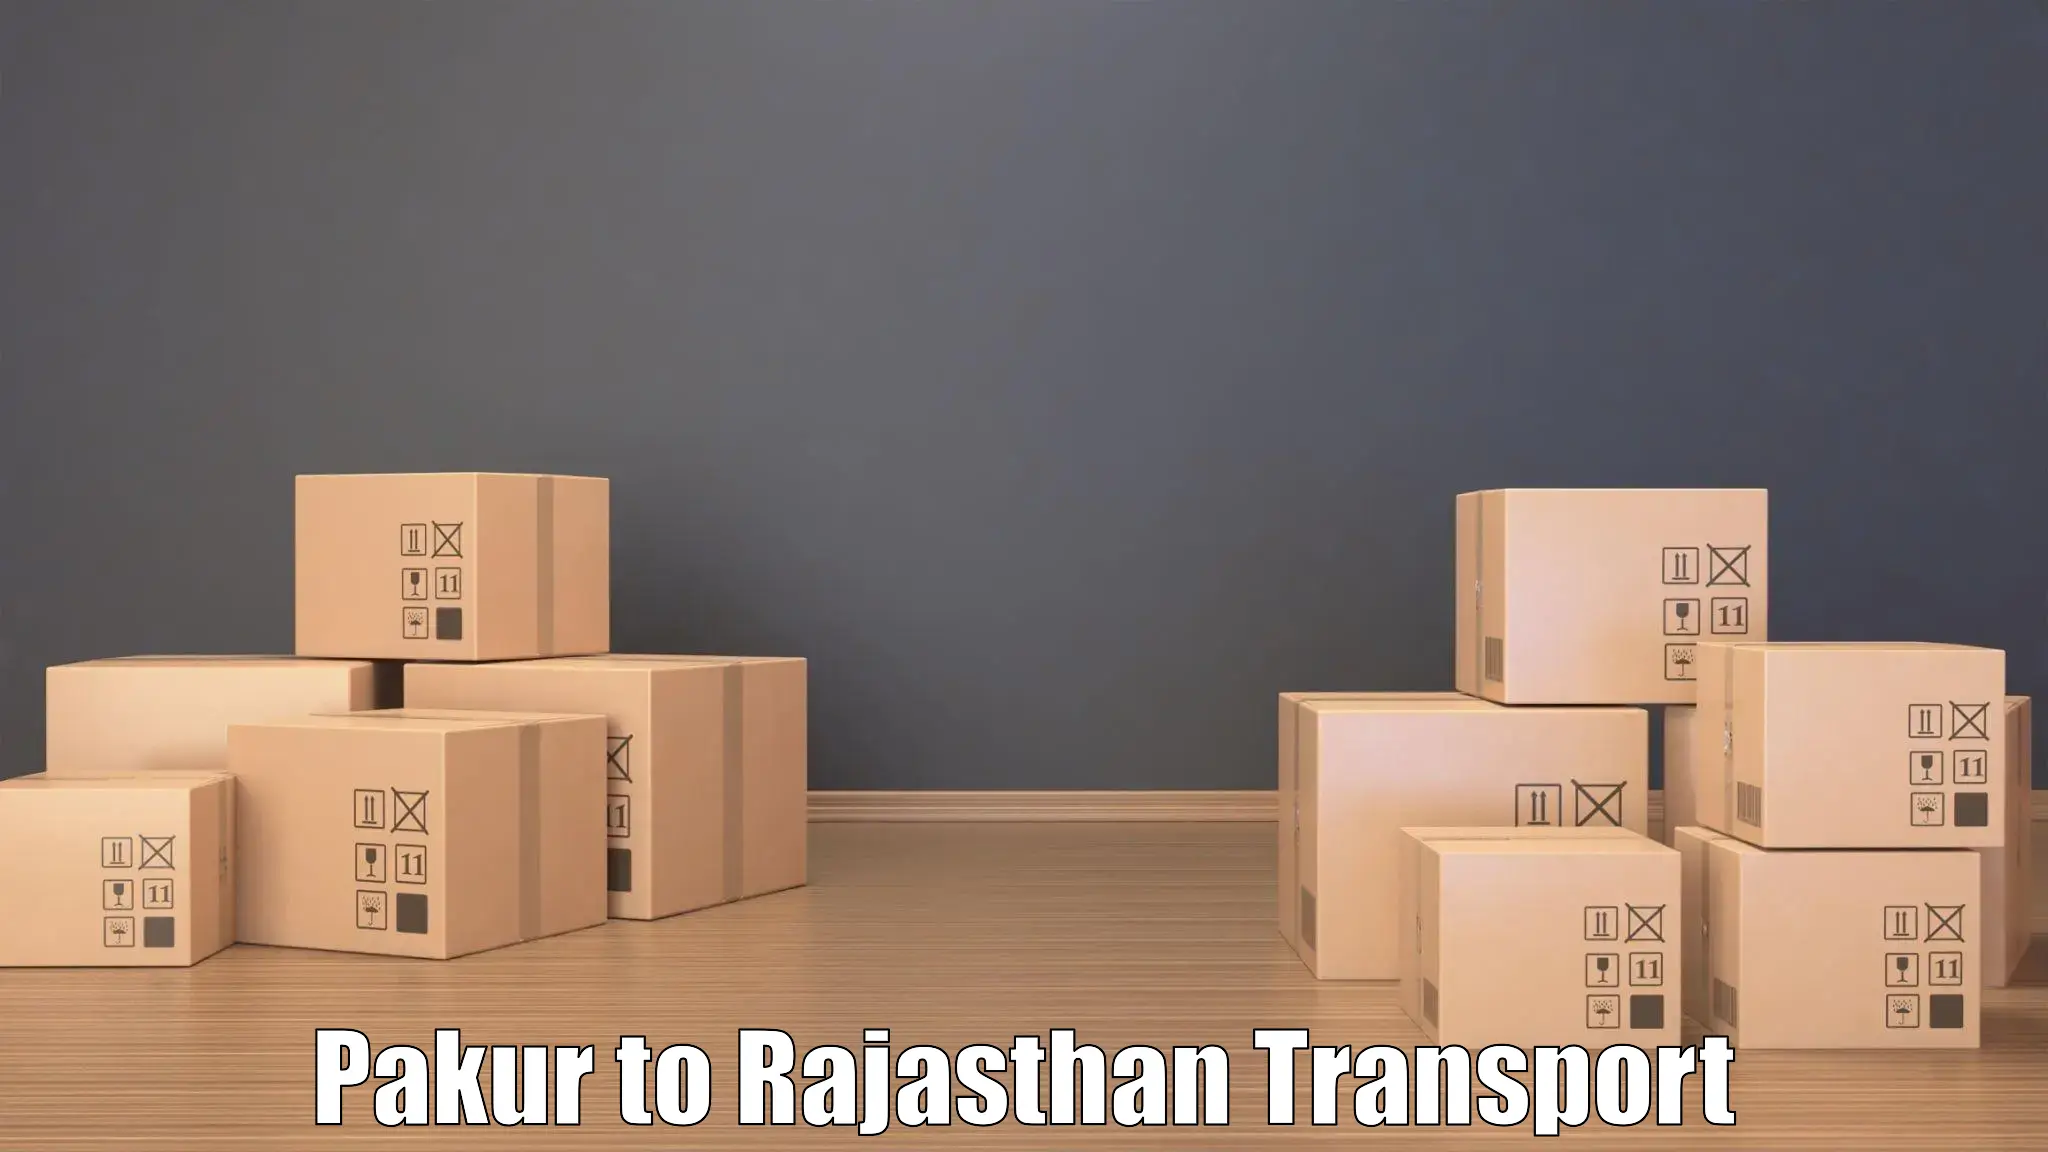 Air freight transport services Pakur to Bhopalgarh